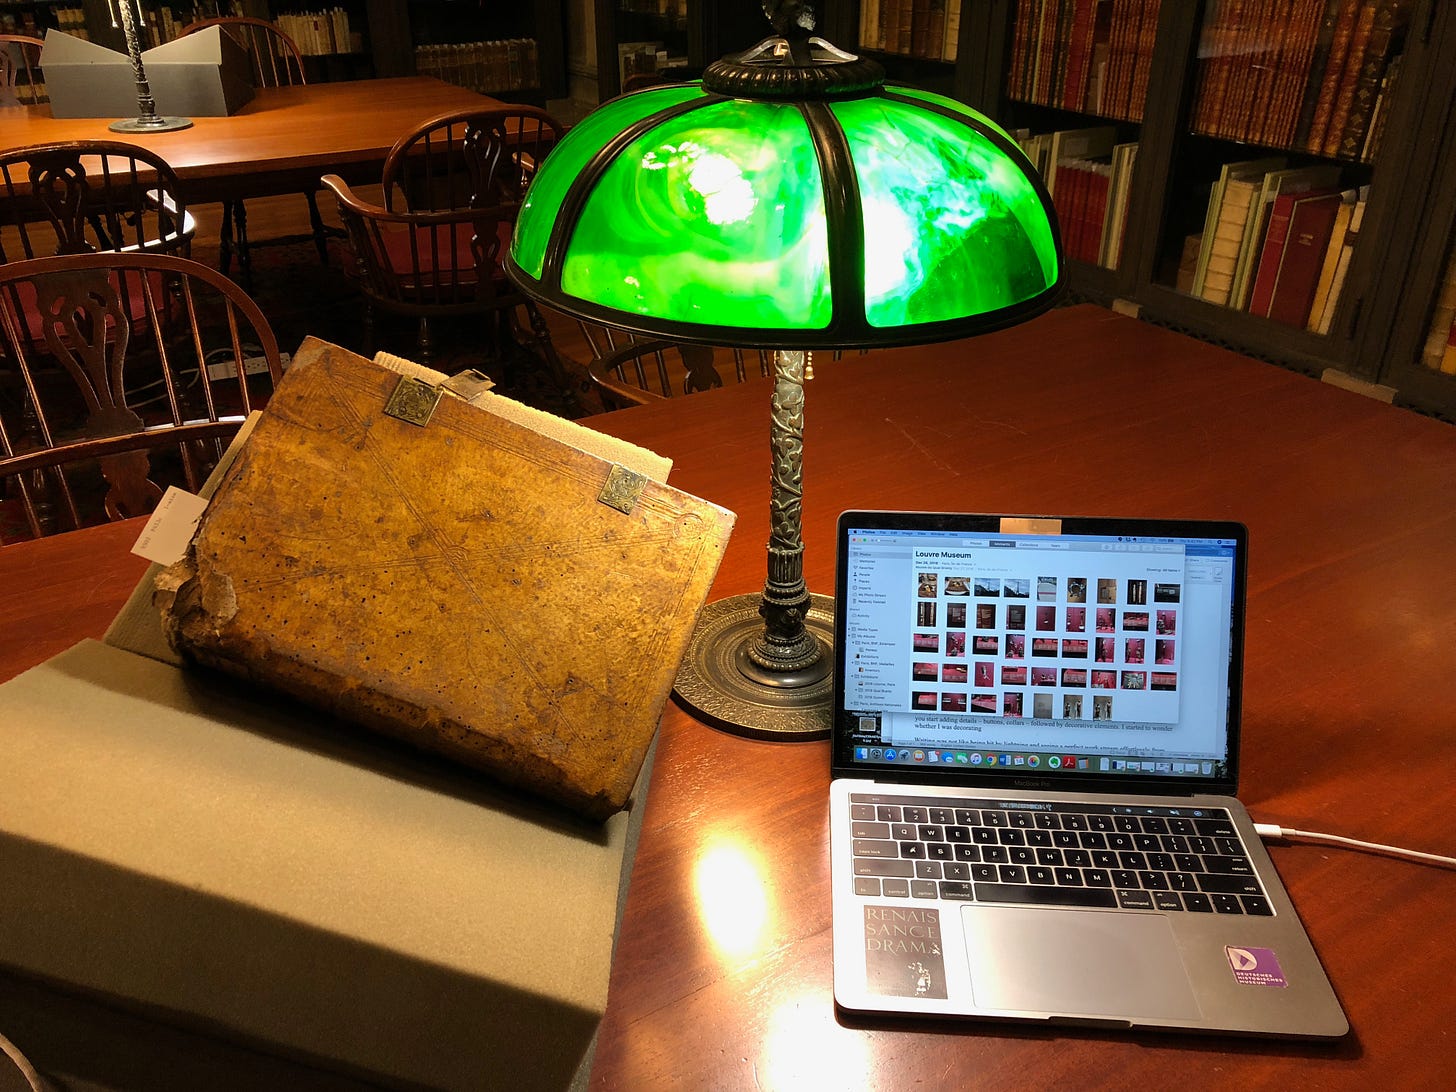 An old book bound with clasps sits on cushions on a wooden library table lit by a decorative desk lamp next to a Mac Powerbook.